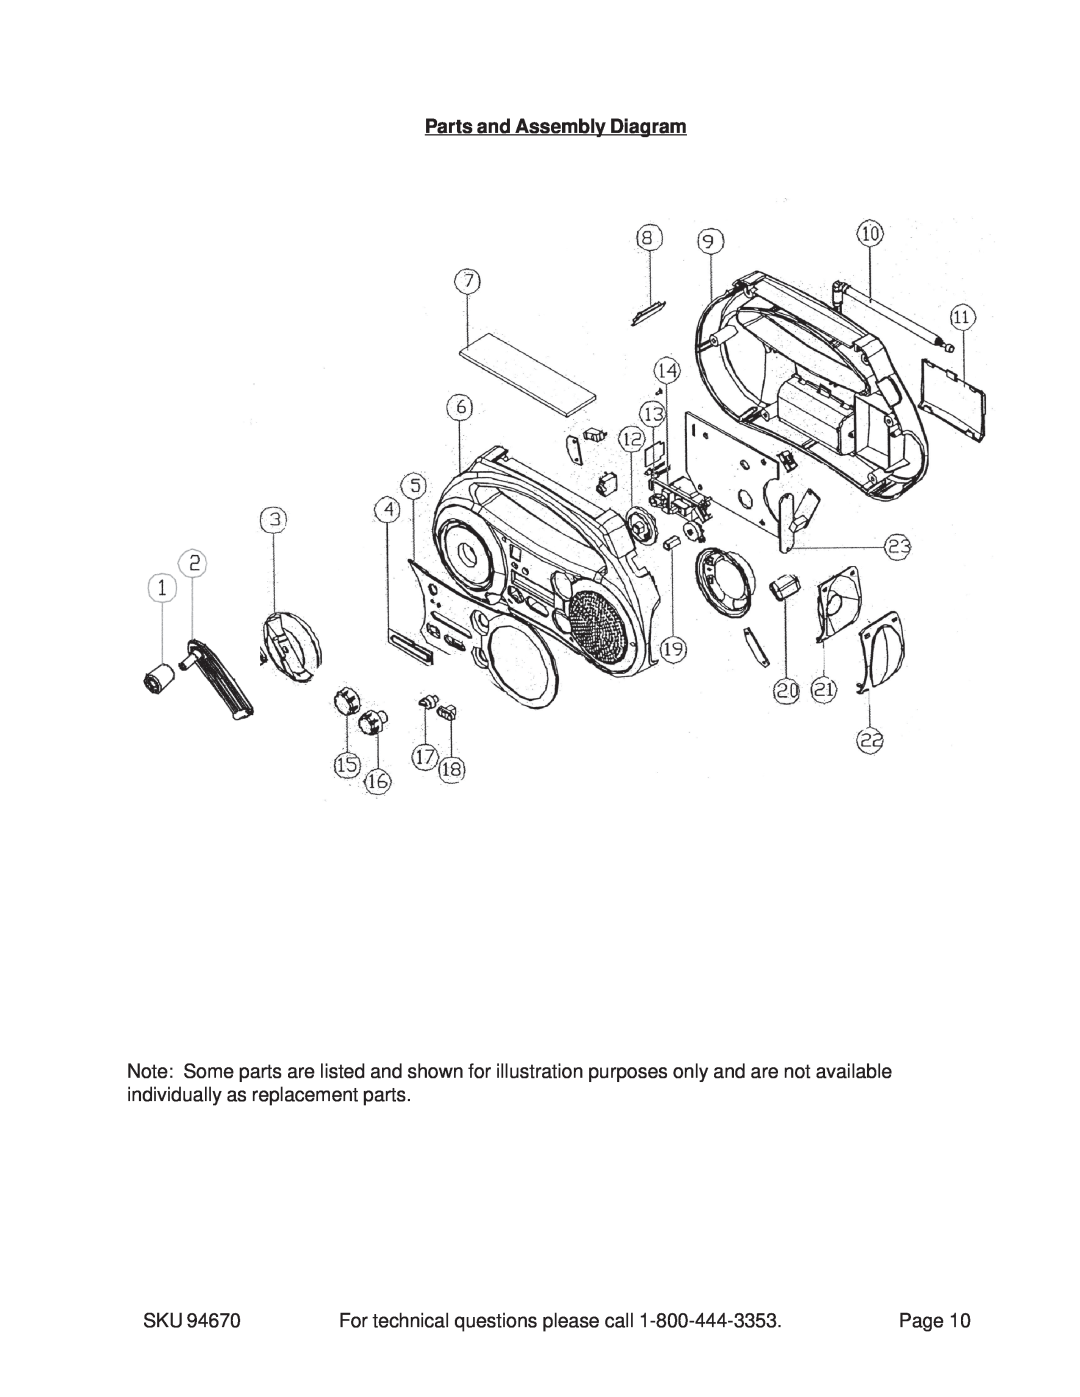 Harbor Freight Tools 94670 manual Parts and Assembly Diagram, For technical questions please call, Page 